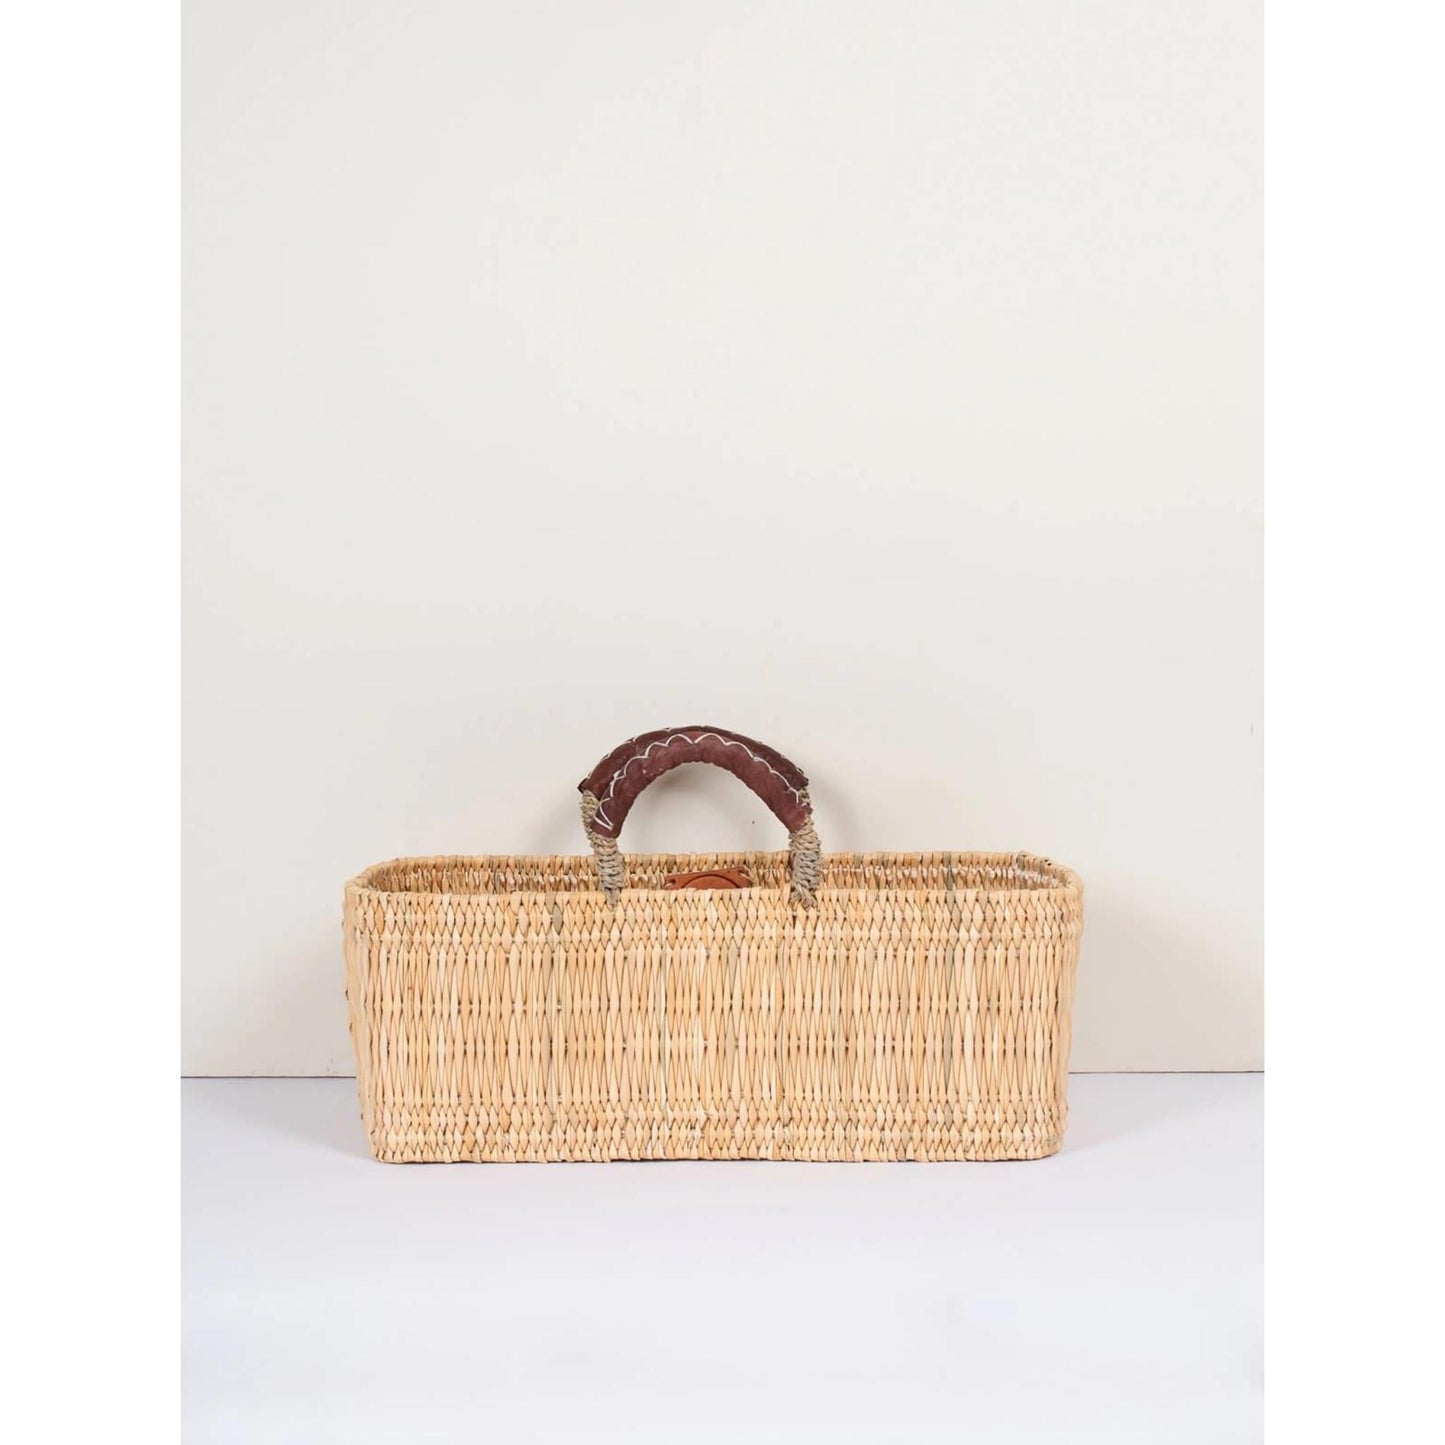 Narrow rectangular handled basket handmade in Morocco with ethically-sourced woven palm leaves and naturally tanned leather shown in medium size